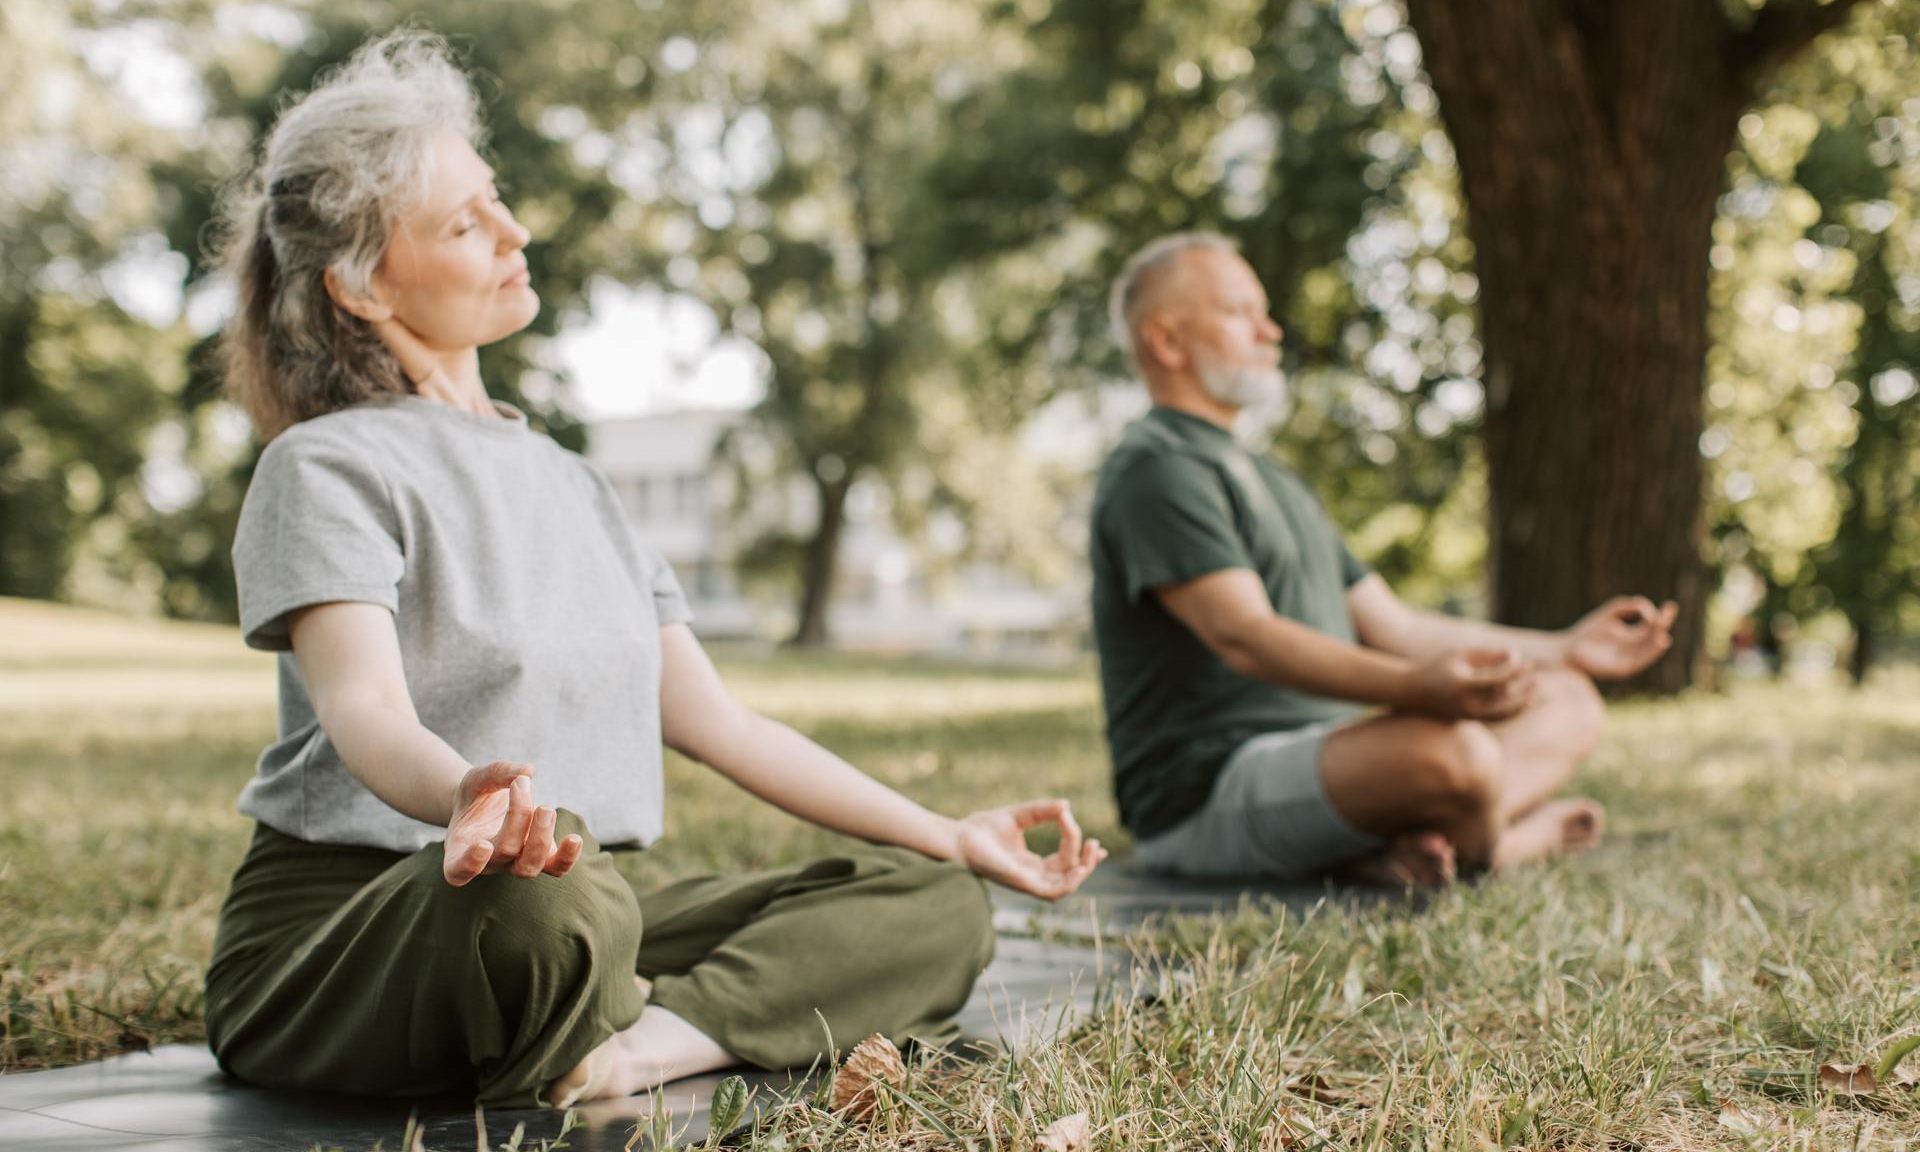 2 elderly people sitting next to each other under a tree meditating